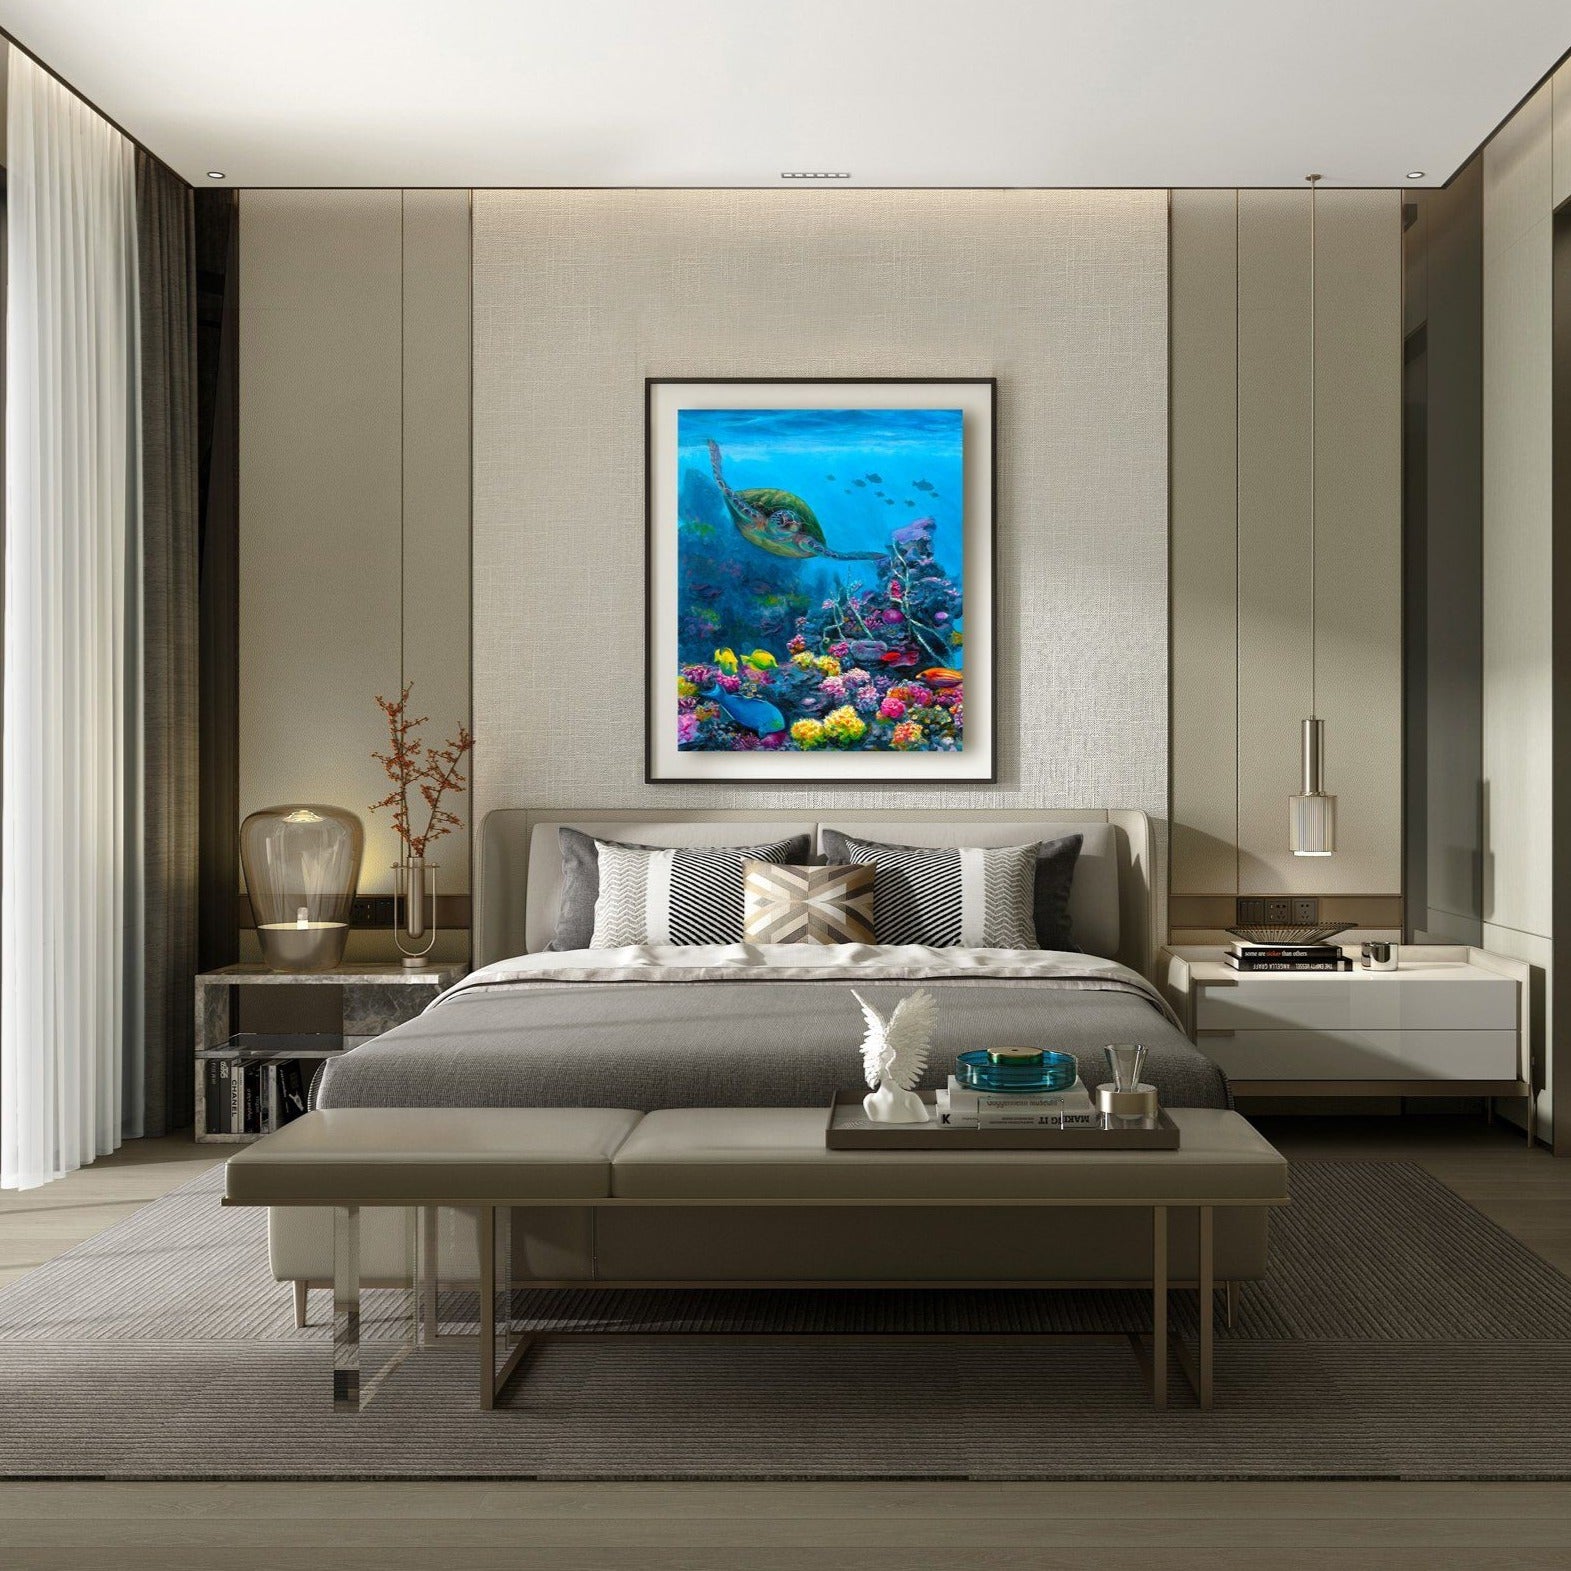 Ocean wall art canvas of green sea turtle swimming through a coral reef with tropical fish hanging on wall above a bed